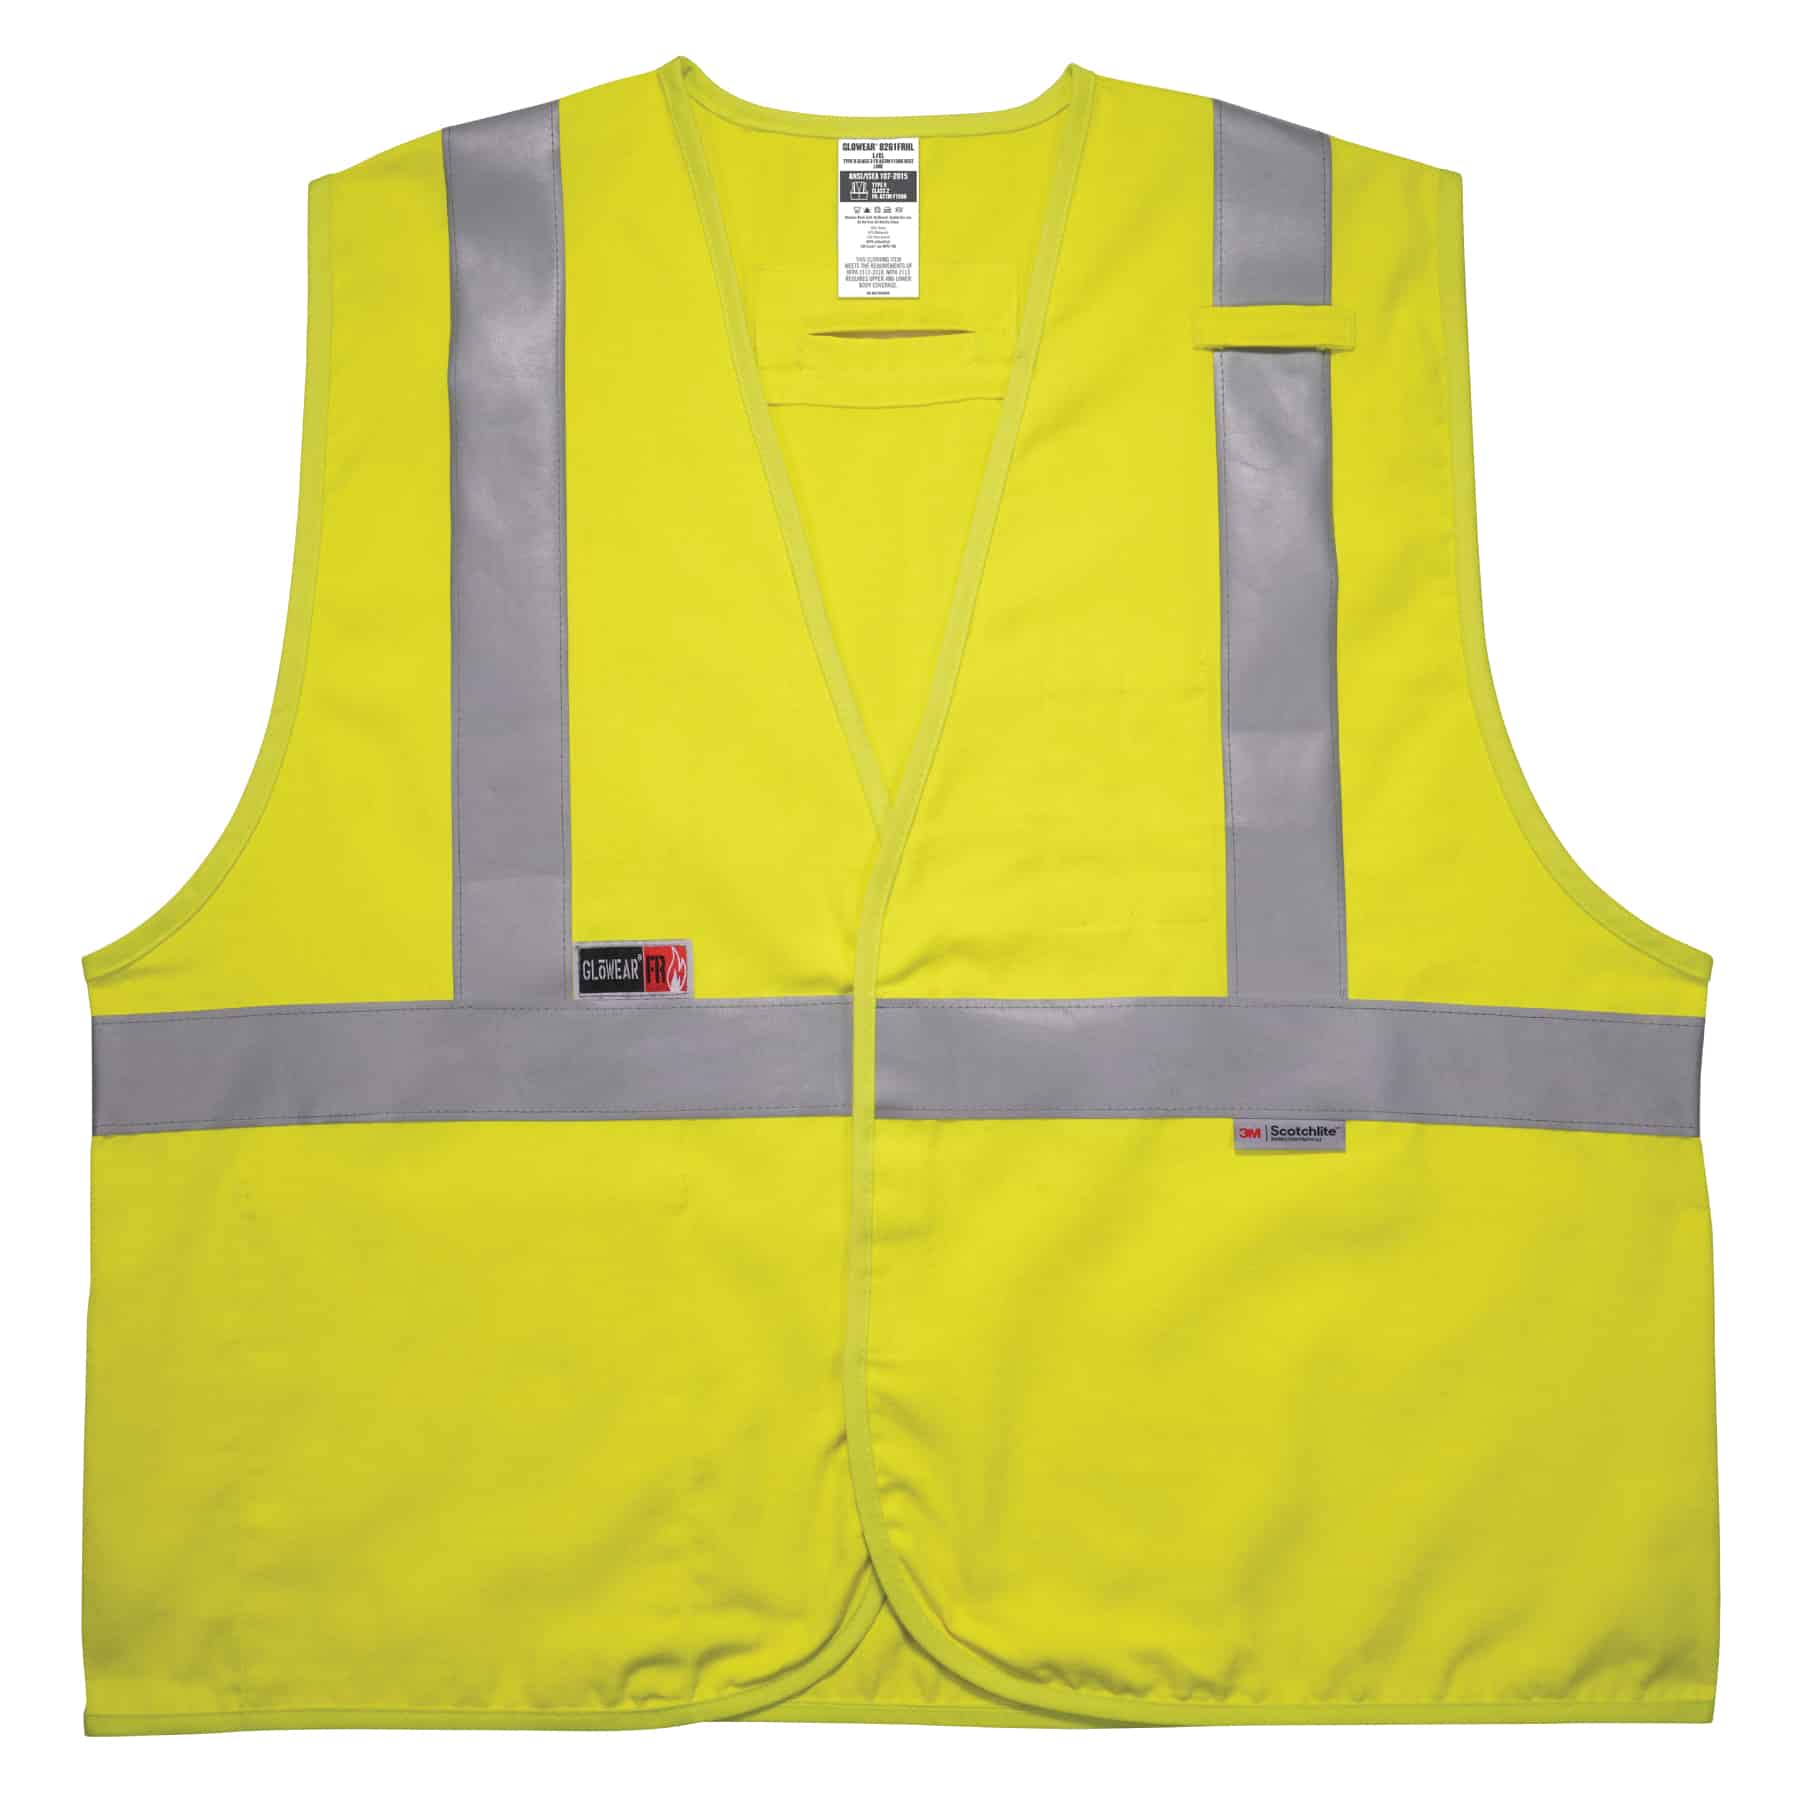 Reflective Contrasting Safety Vest | High Visibility By KwikSafety